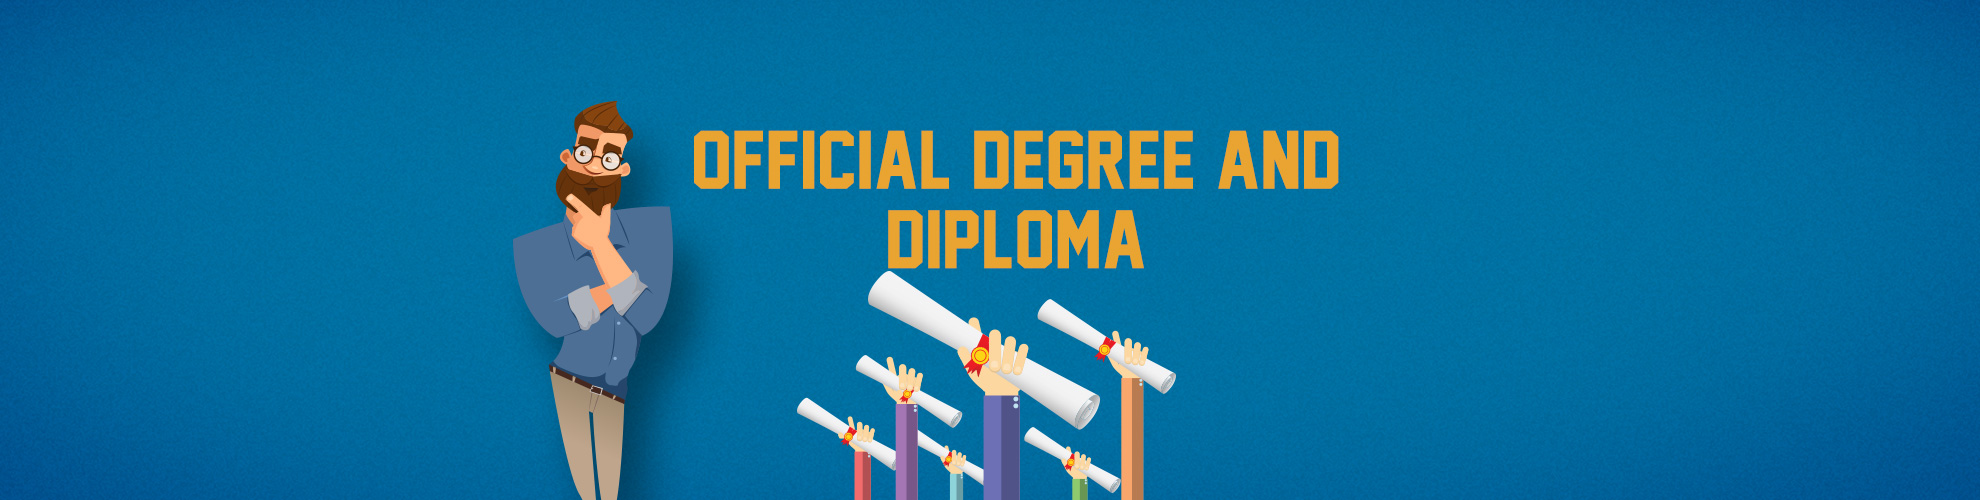 Official Verifiable Degree And Diploma